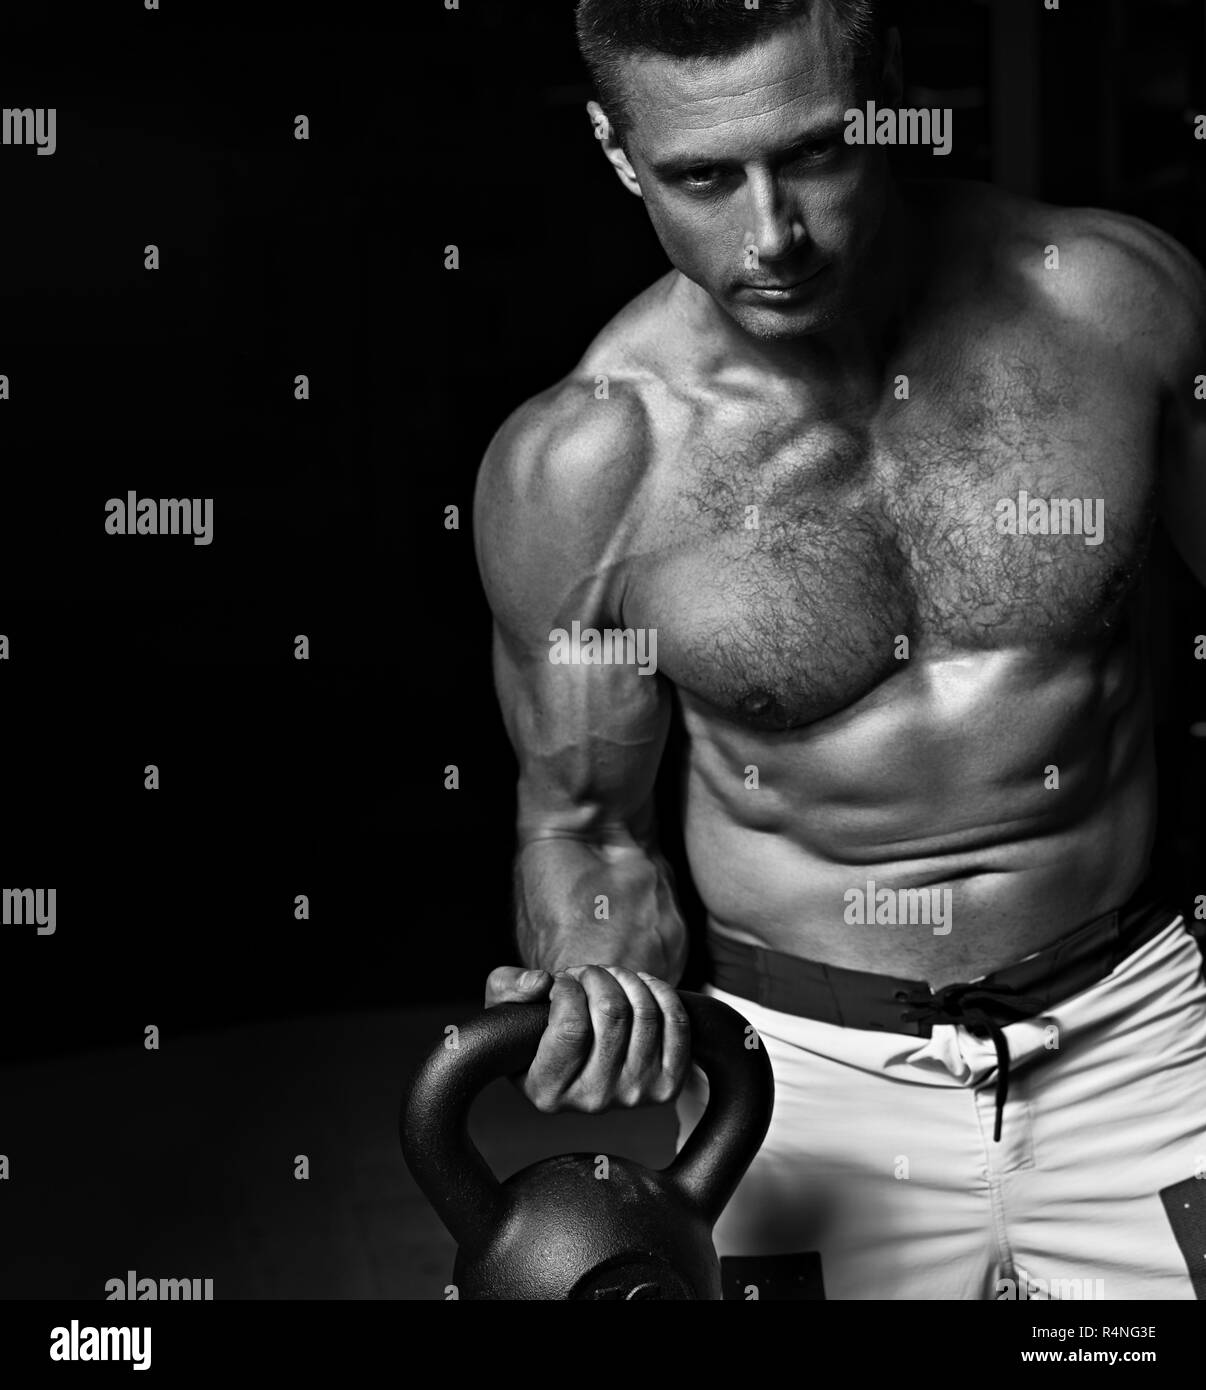 Strong angry athletic man doing the exercises with kettlebells on dark shadow background. Closeup portrait. Black and white Stock Photo